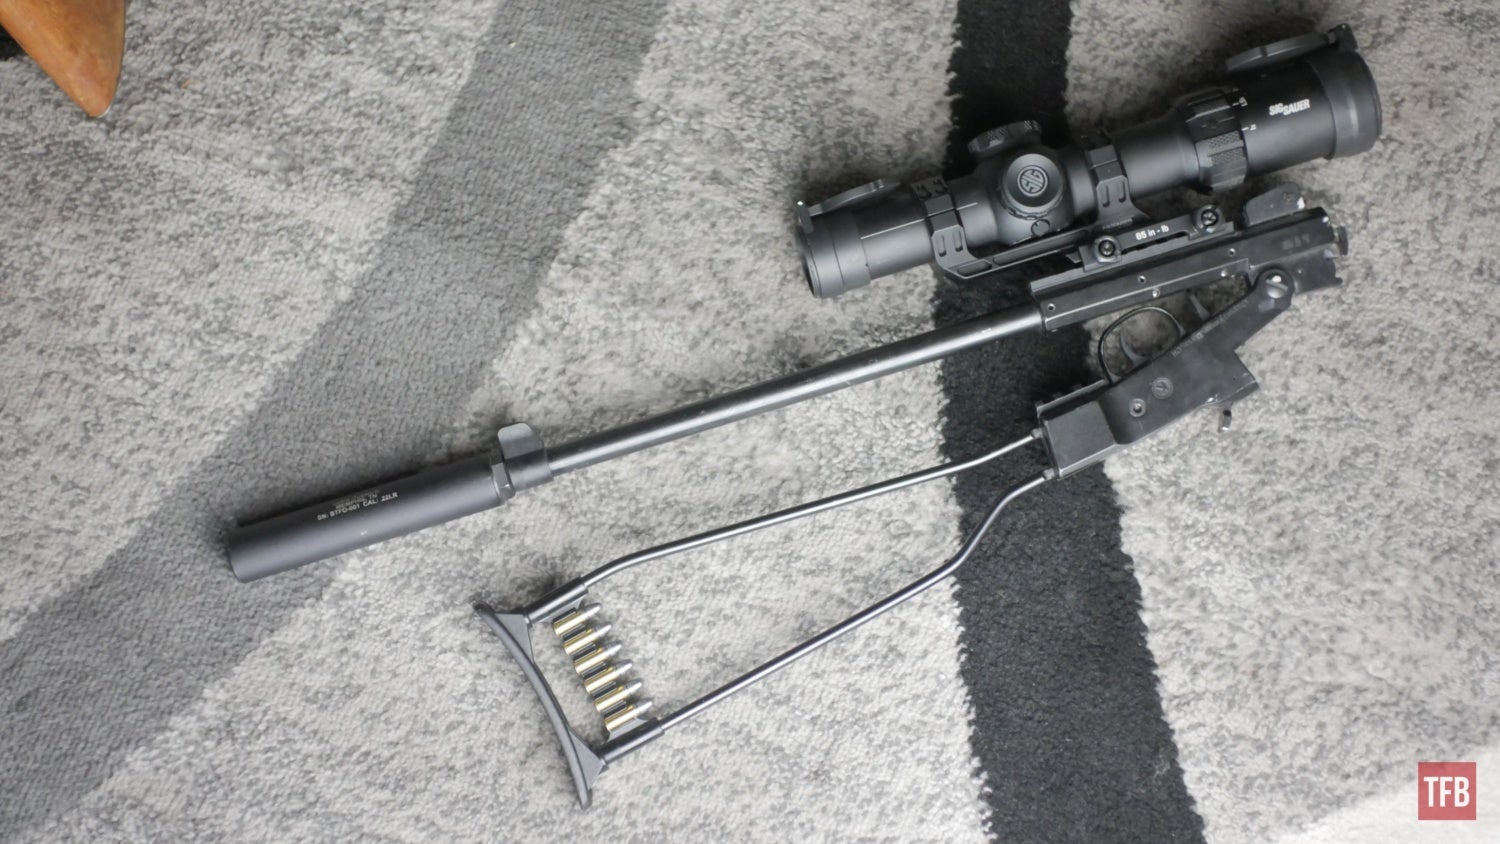 The Rimfire Report: Italy's Chiappa Little Badger 22LR Survival Rifle